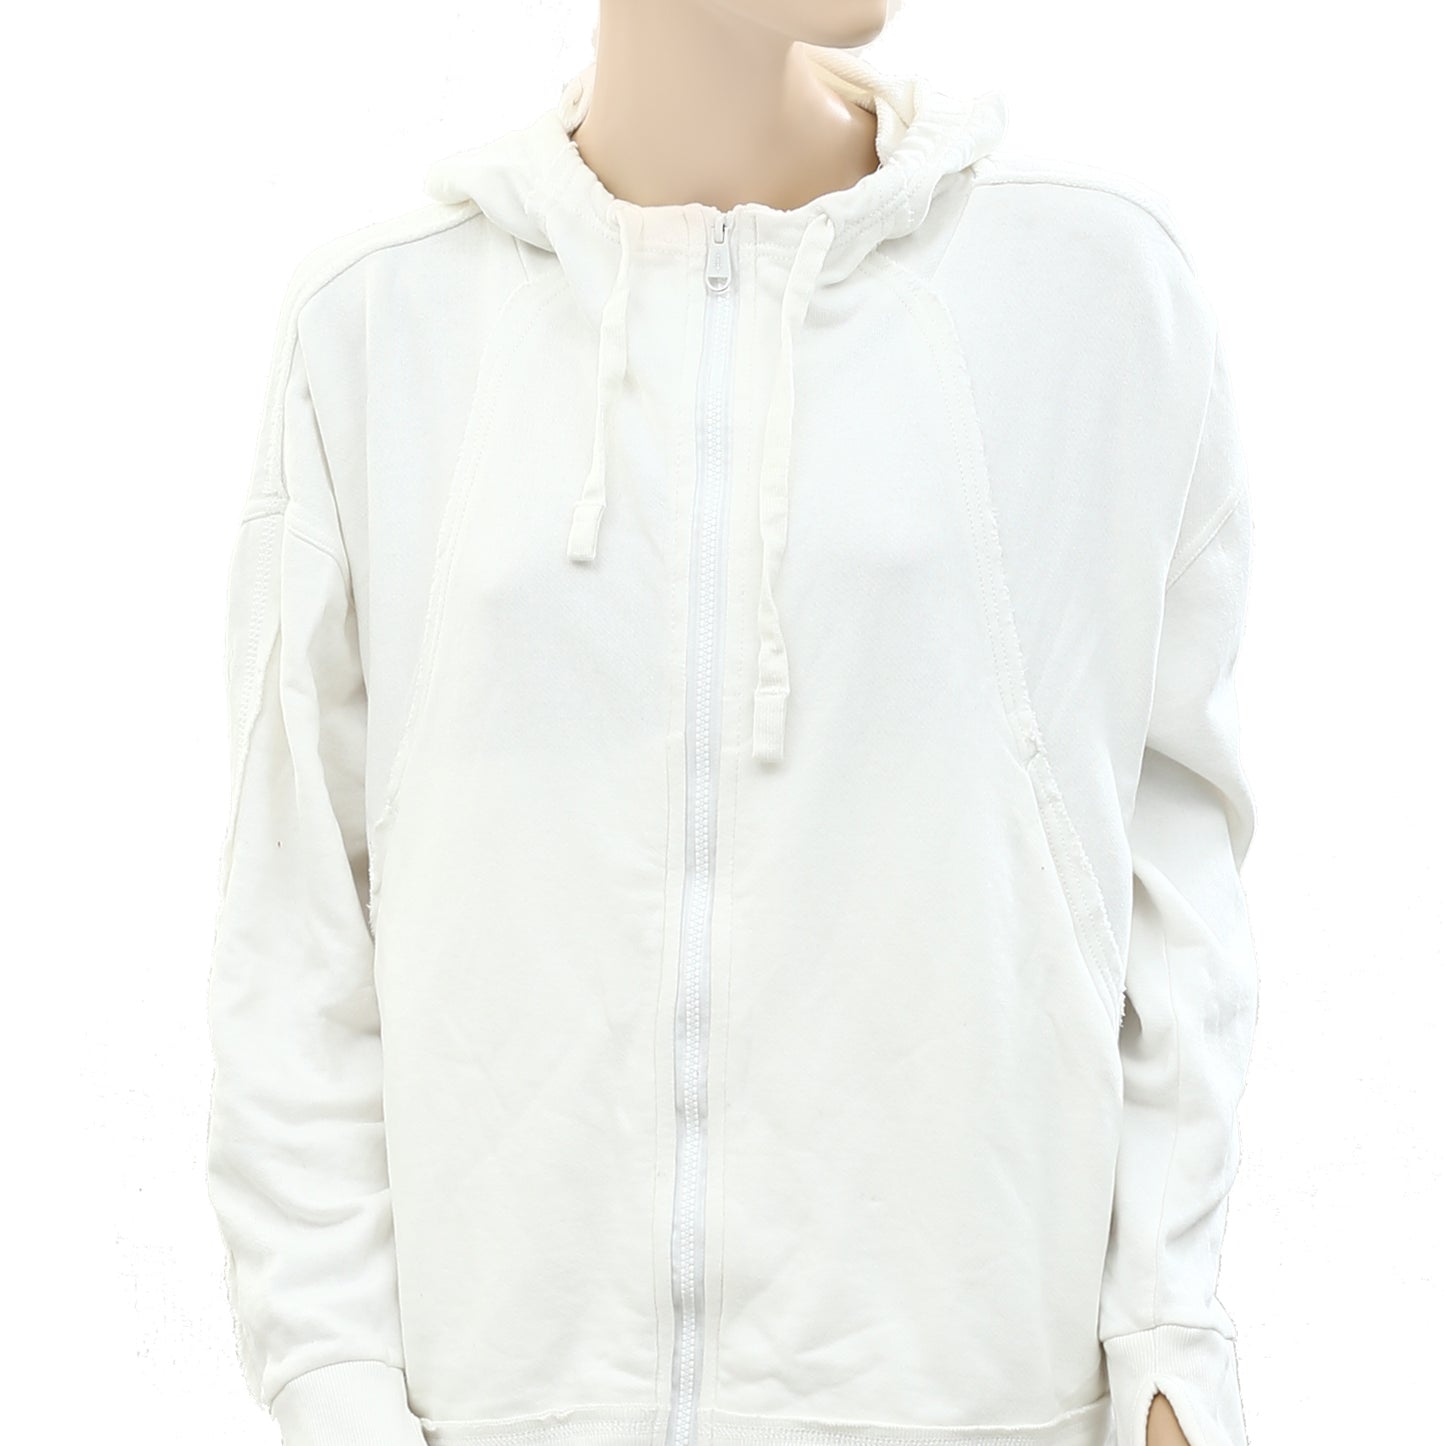 Free People FP Movement Only One Hoodie Jacket Top